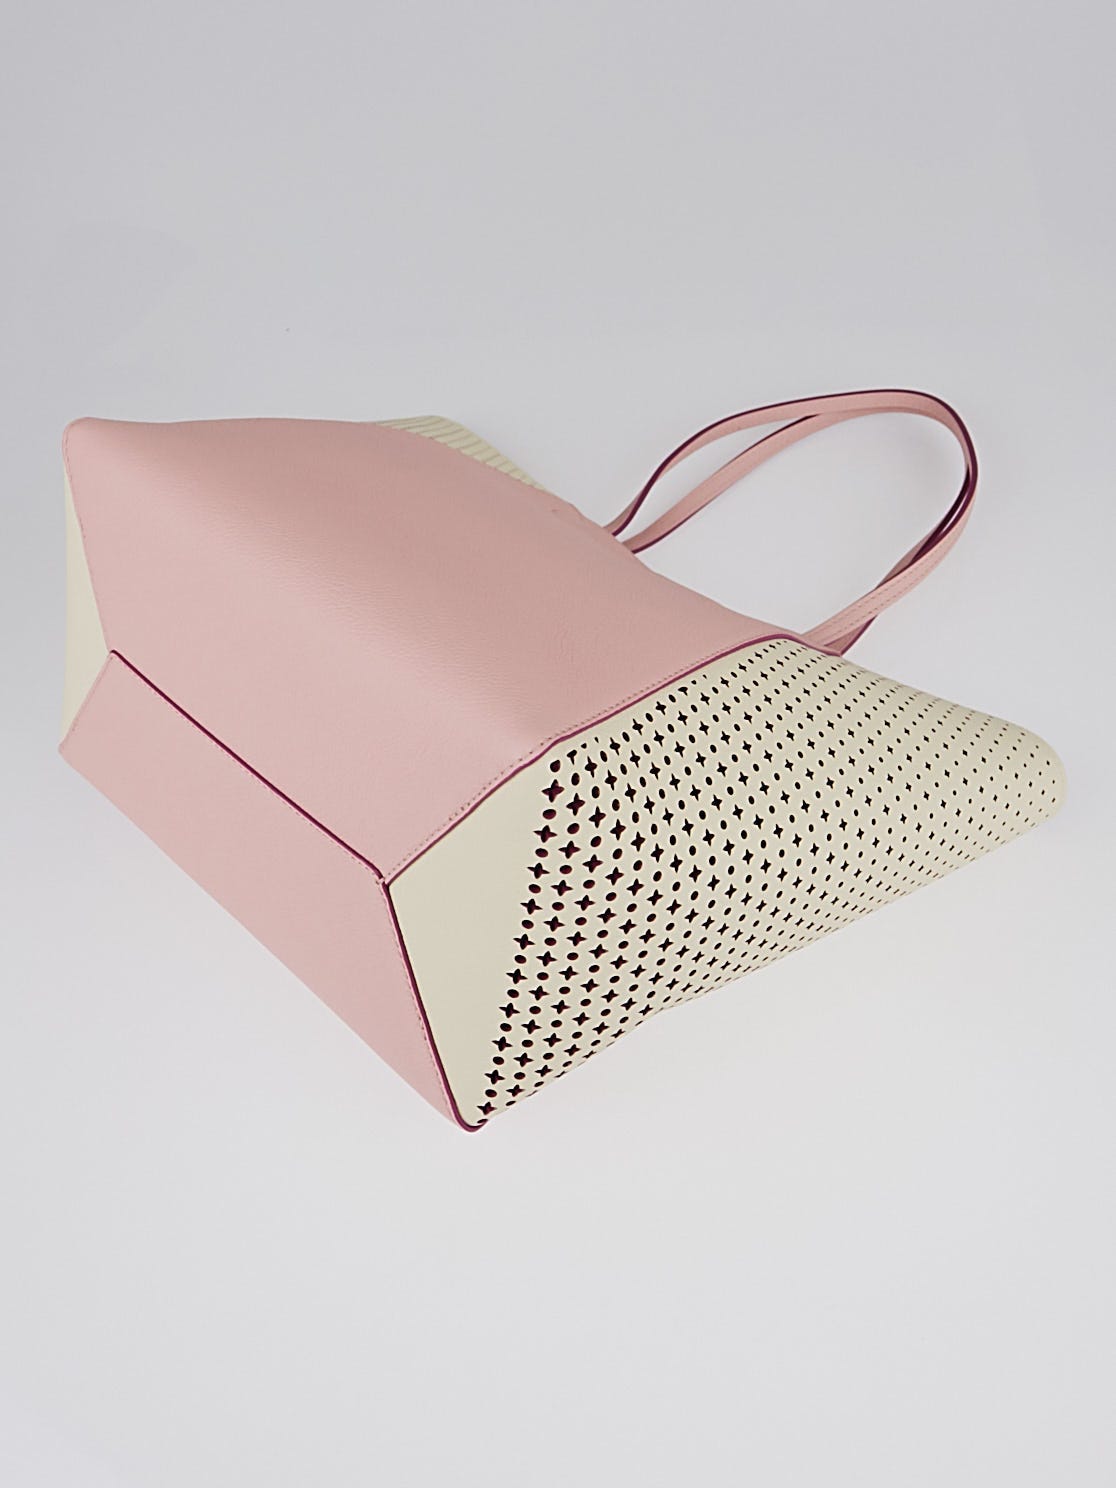 LOUIS VUITTON Lockme Cabas Perforated Leather Shoulder Bag Pink